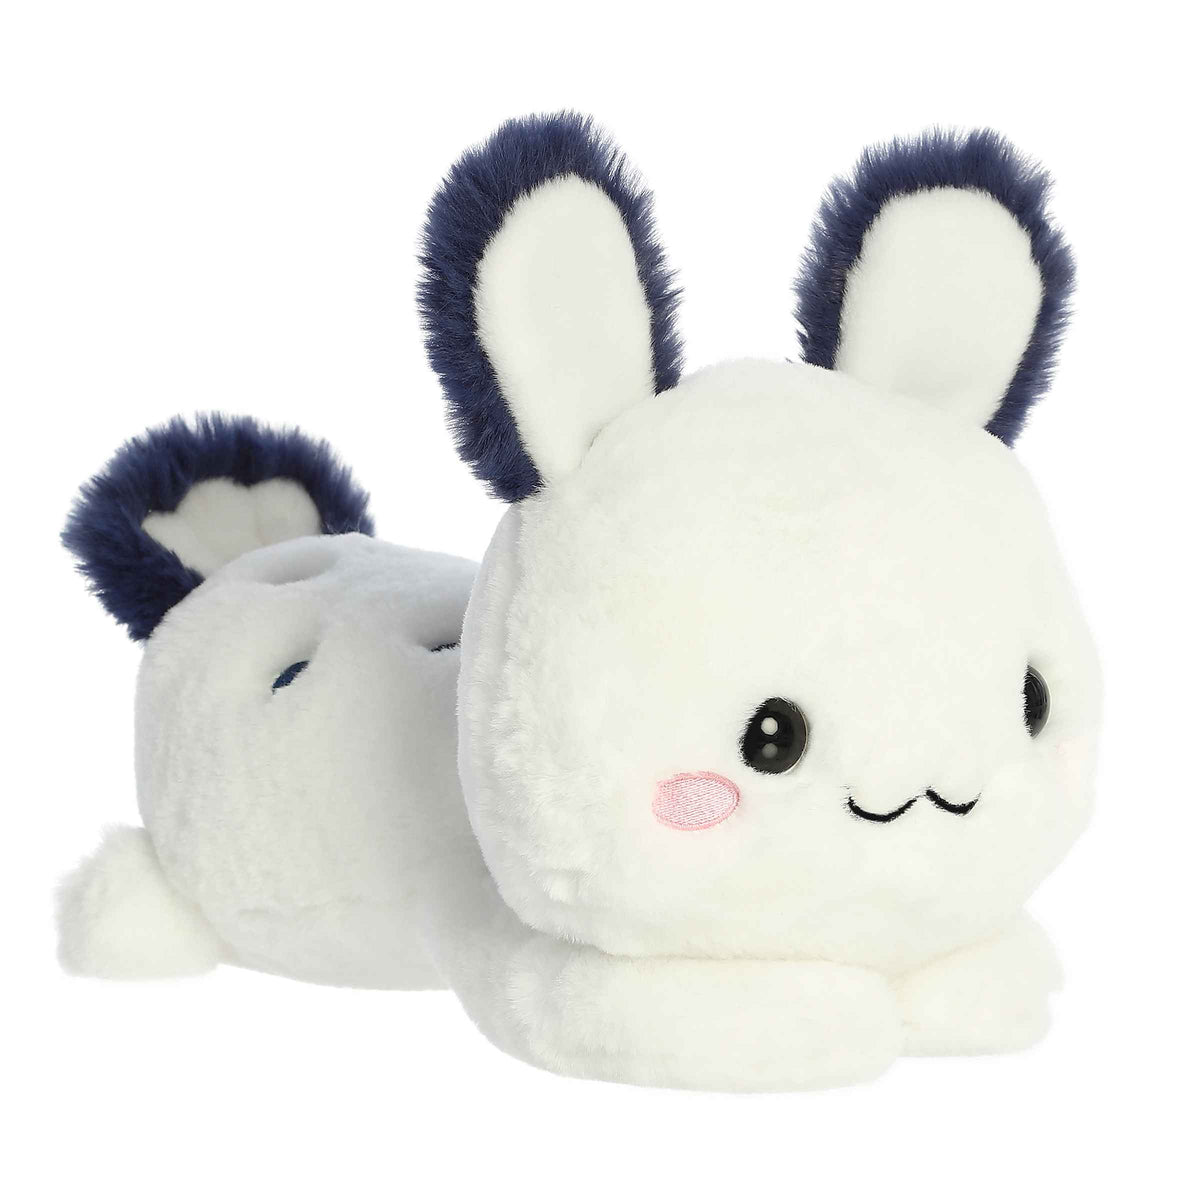 Sonny Sea Bunny plush from Too Cute Collection, white and navy, cloud-soft fabric